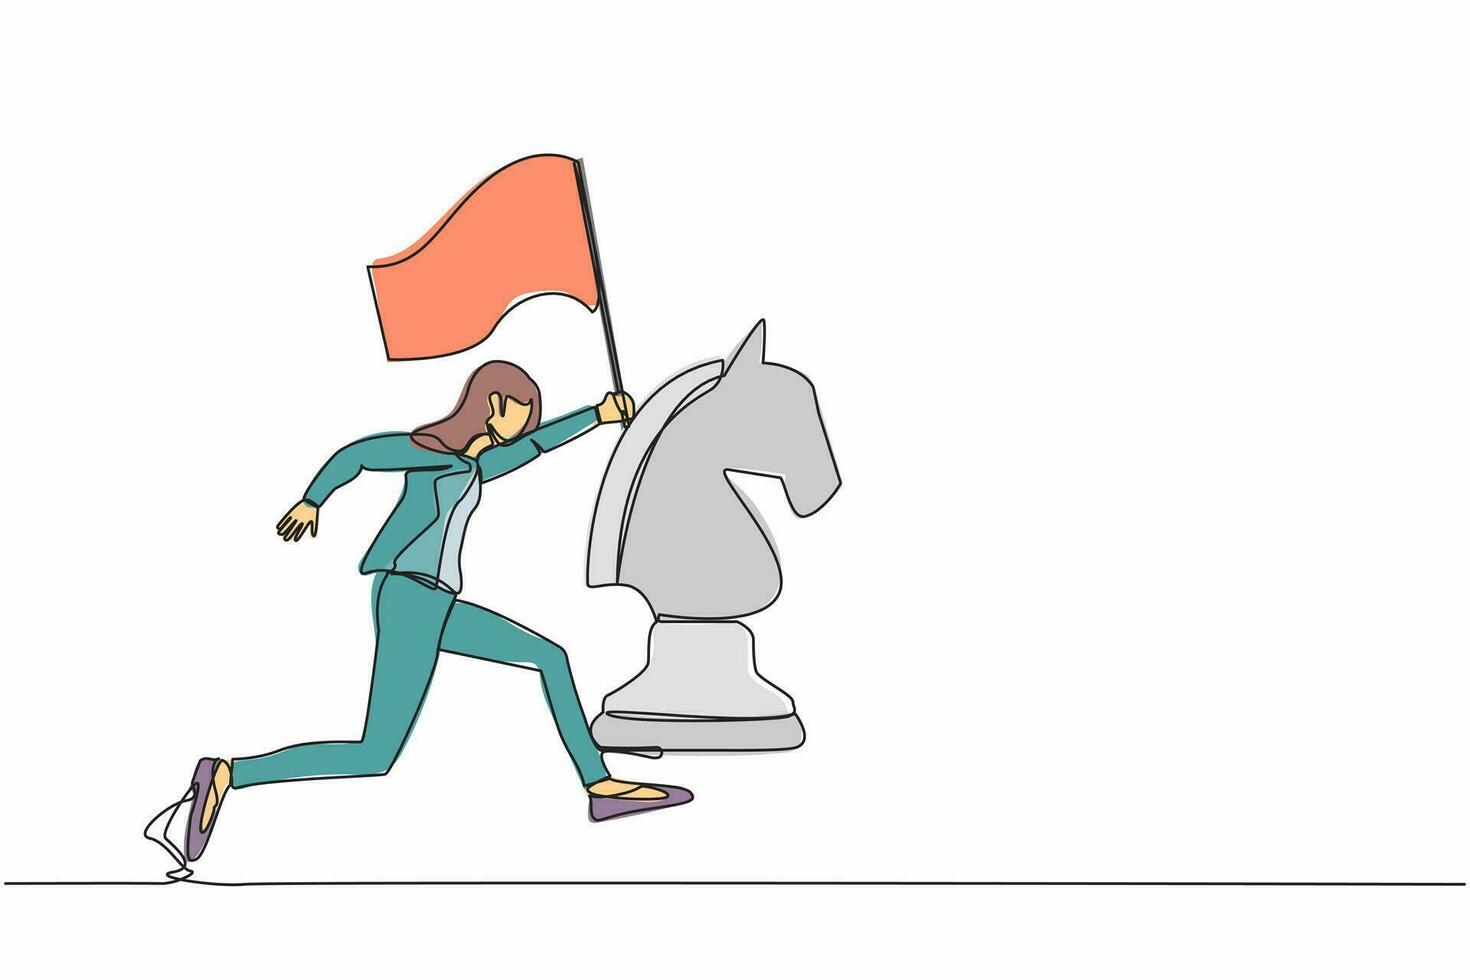 Single continuous line drawing beautiful businesswoman running and holding flag beside big horse chess piece. Celebrate business achievement goal, win competition. One line design vector illustration